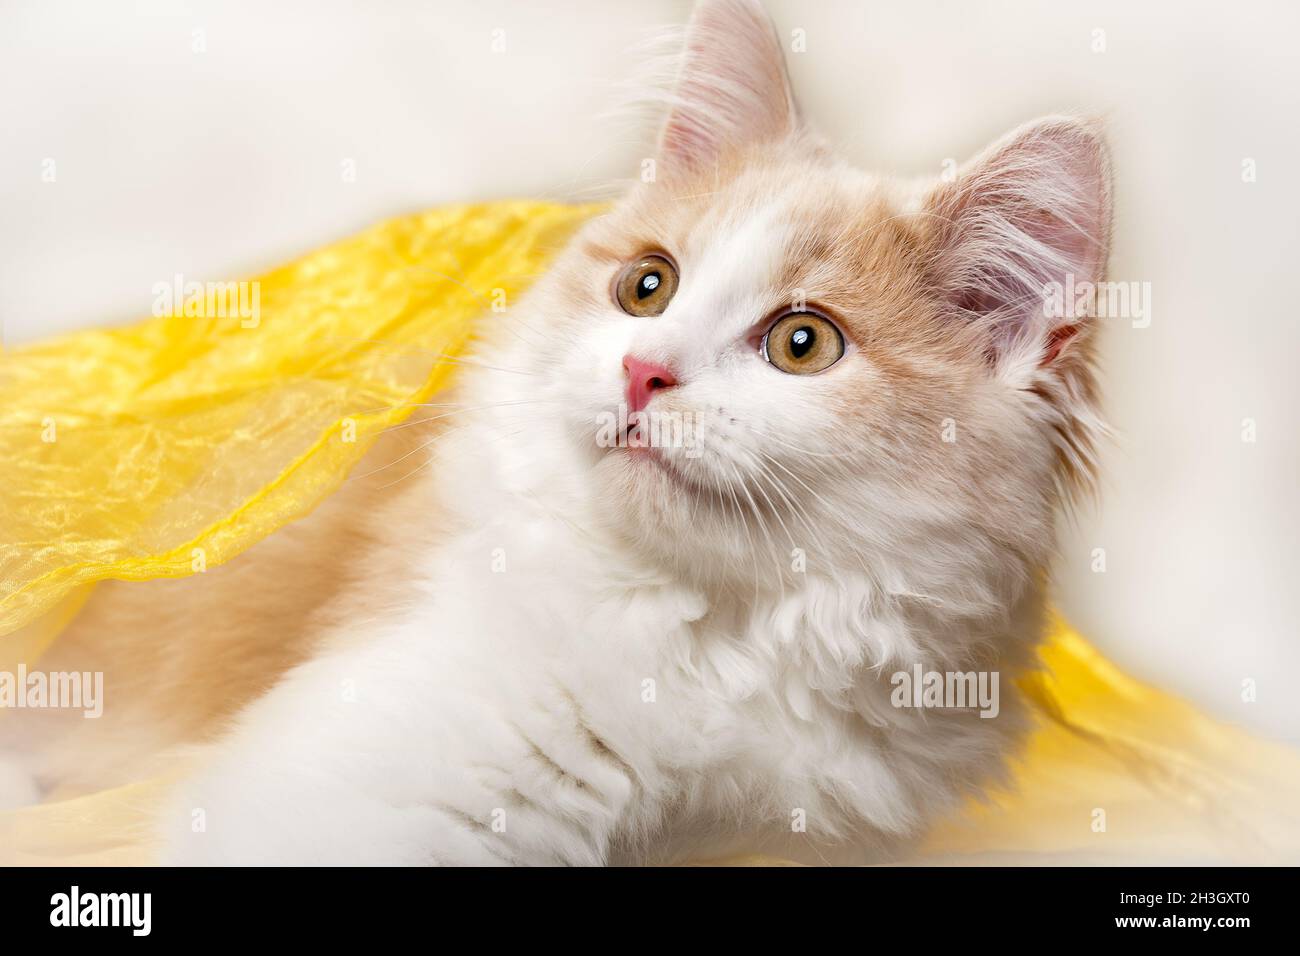 Little cat on a yellow background Stock Photo